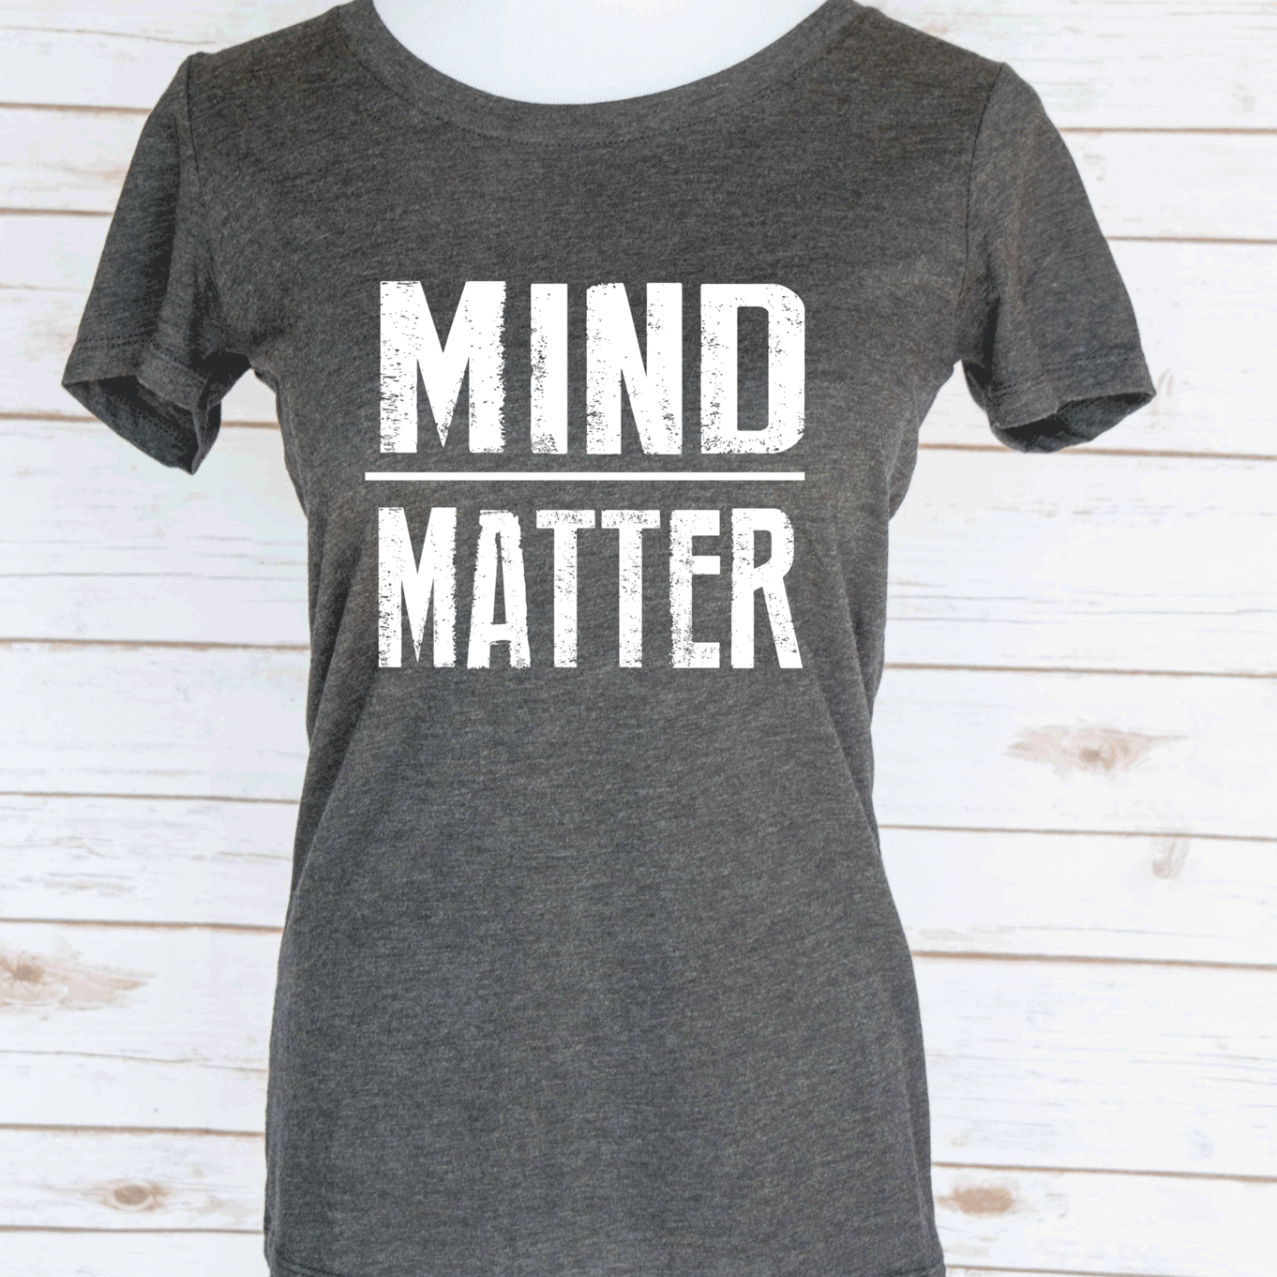 Mind over Matter Casual T-Shirt. Motivational Workout Quote. Scoop Neck Triblend Tee.